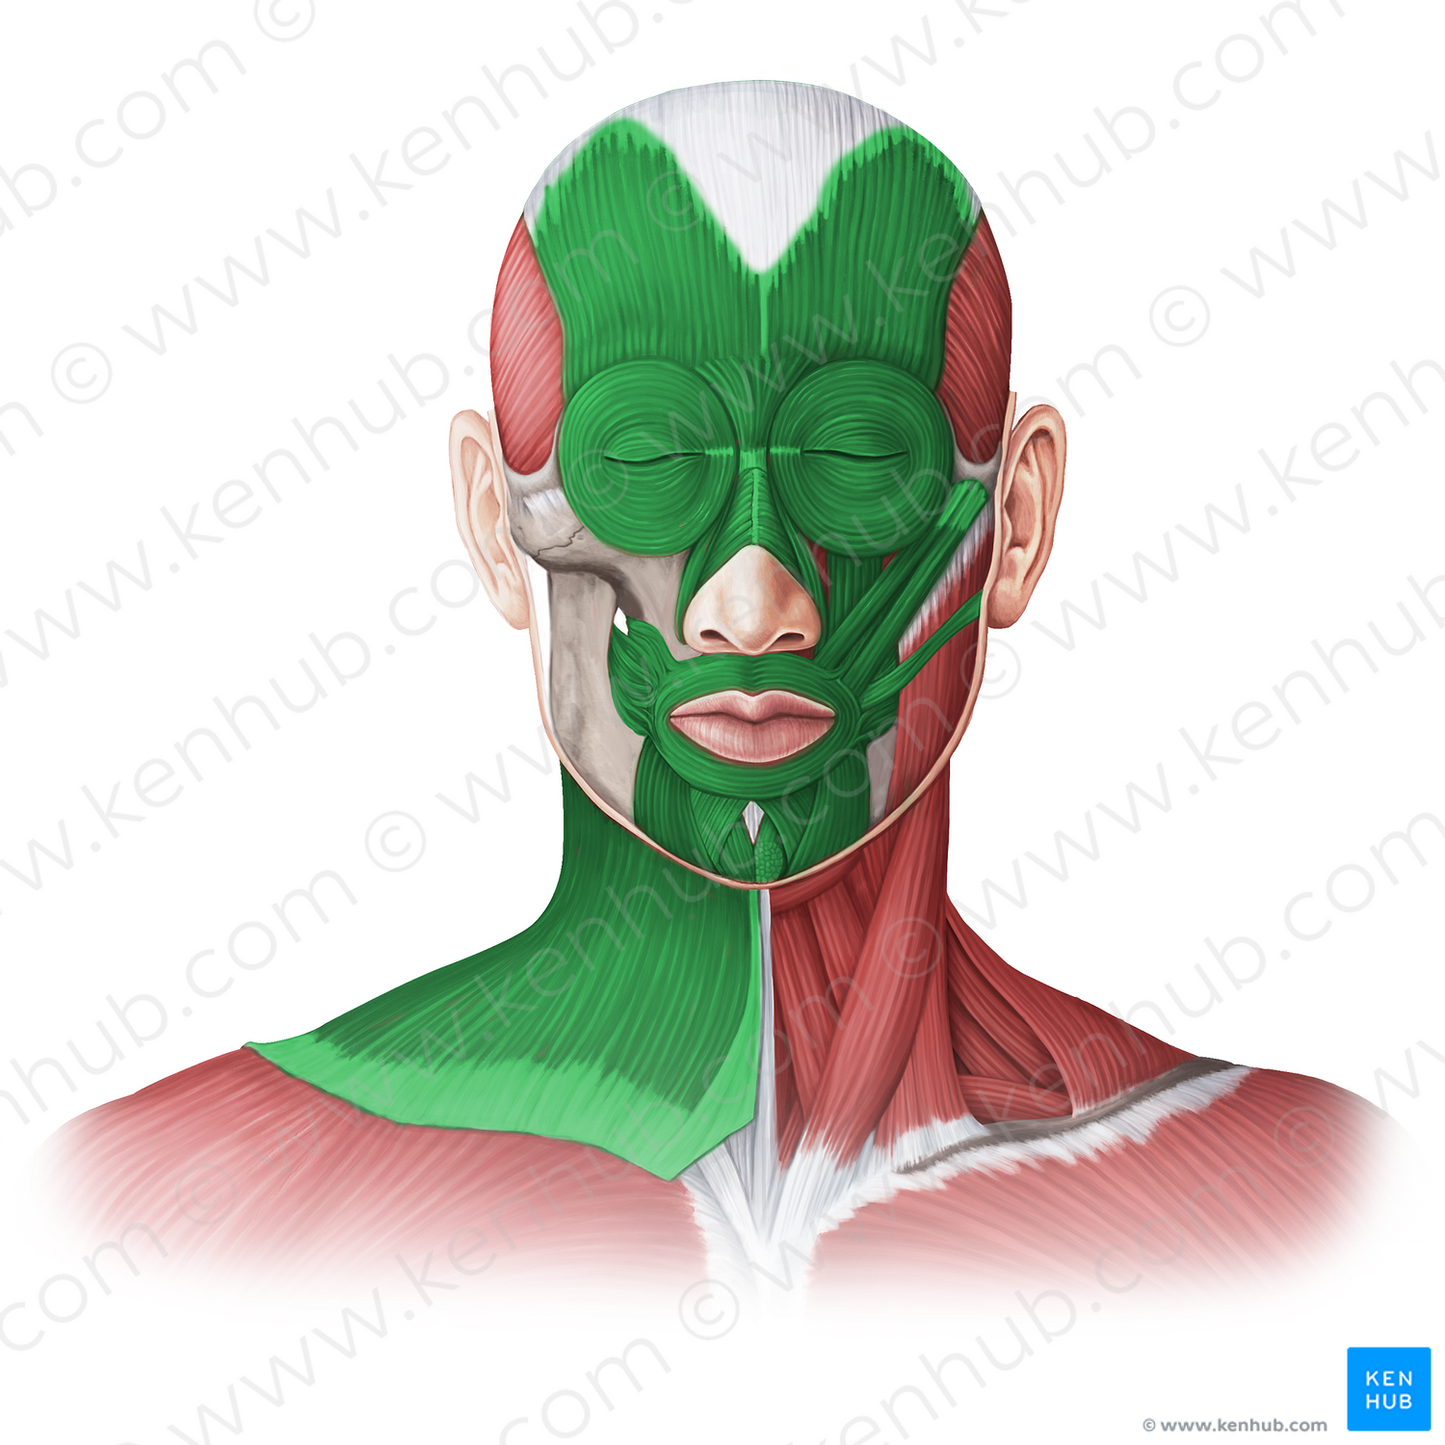 Muscles of facial expression (#20076)